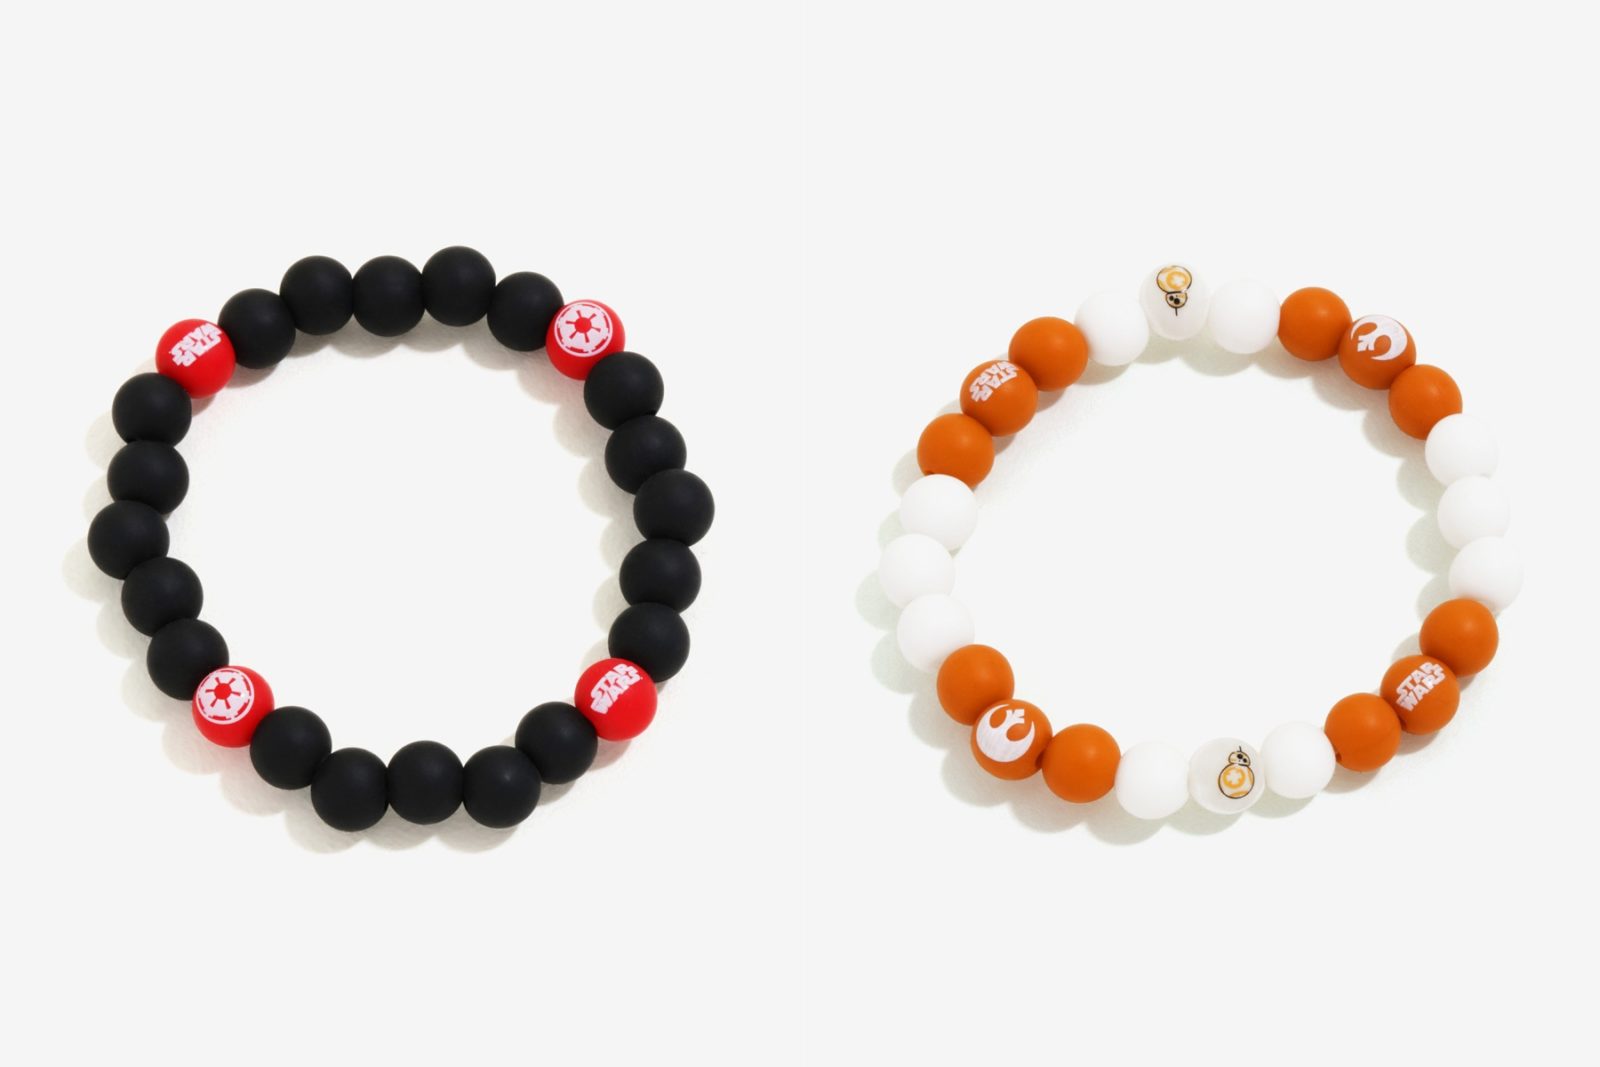 Body Vibe x Star Wars BB-8 silicone bead bracelet at Box Lunch